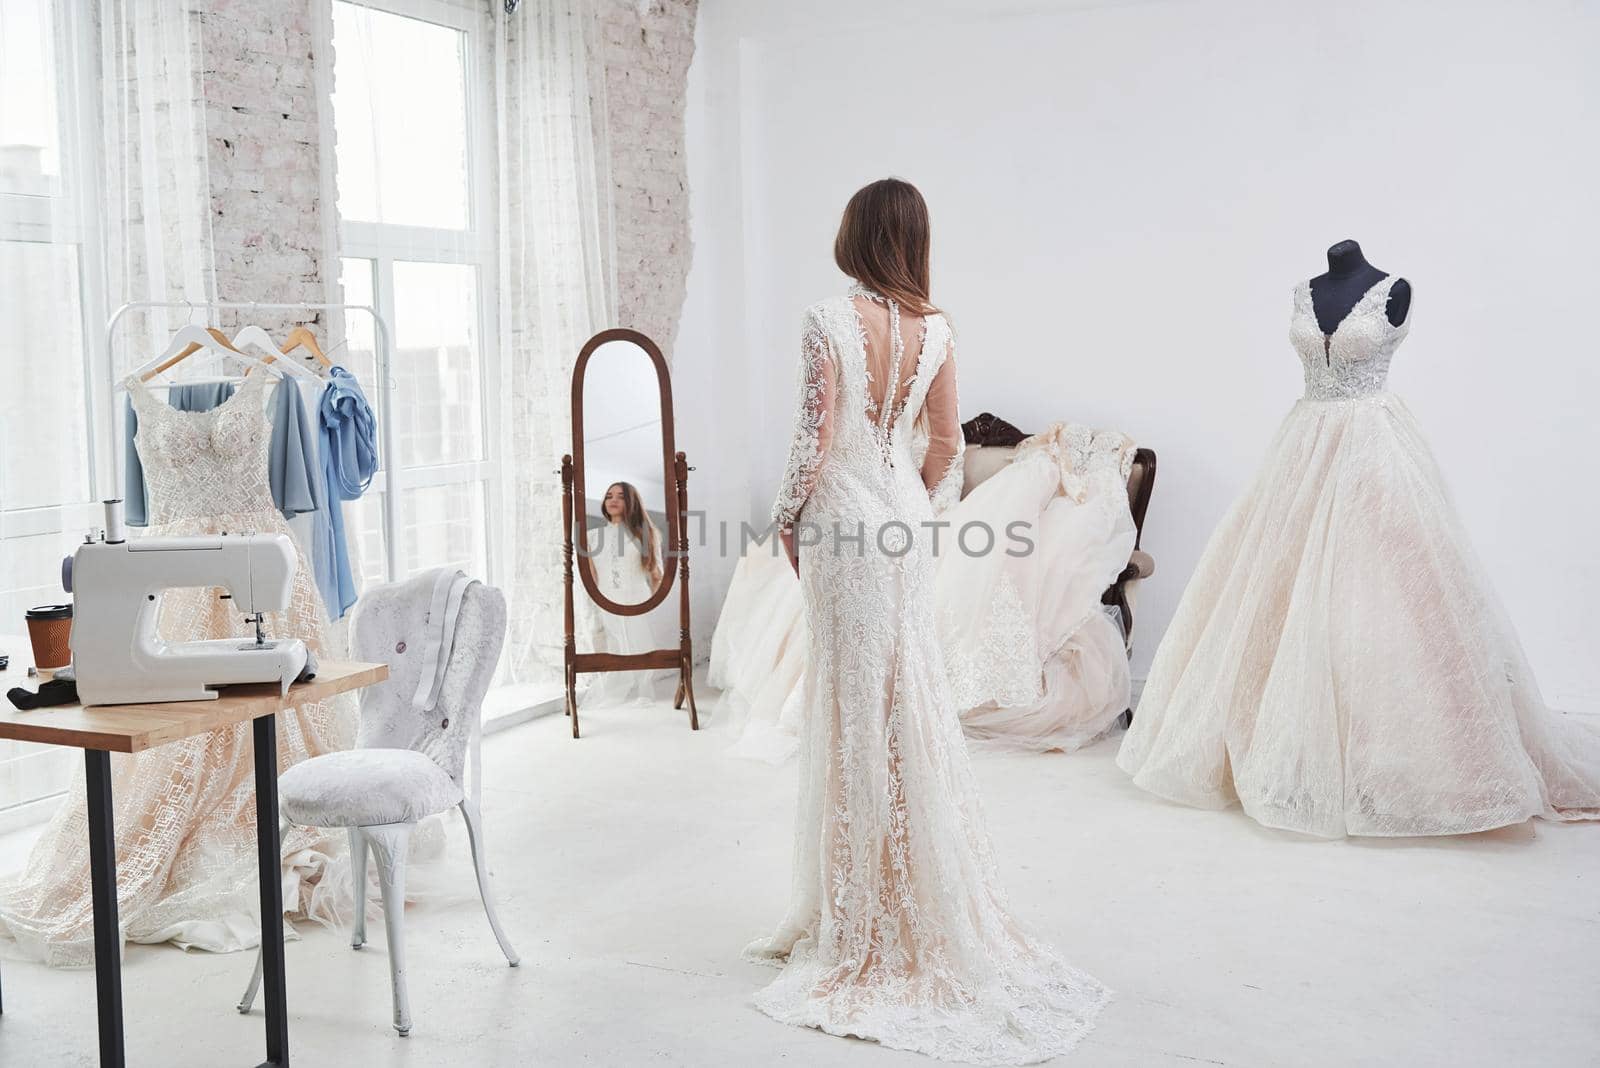 Showing back and looking in the mirror. The process of fitting the dress in the studio of hand crafted clothes.